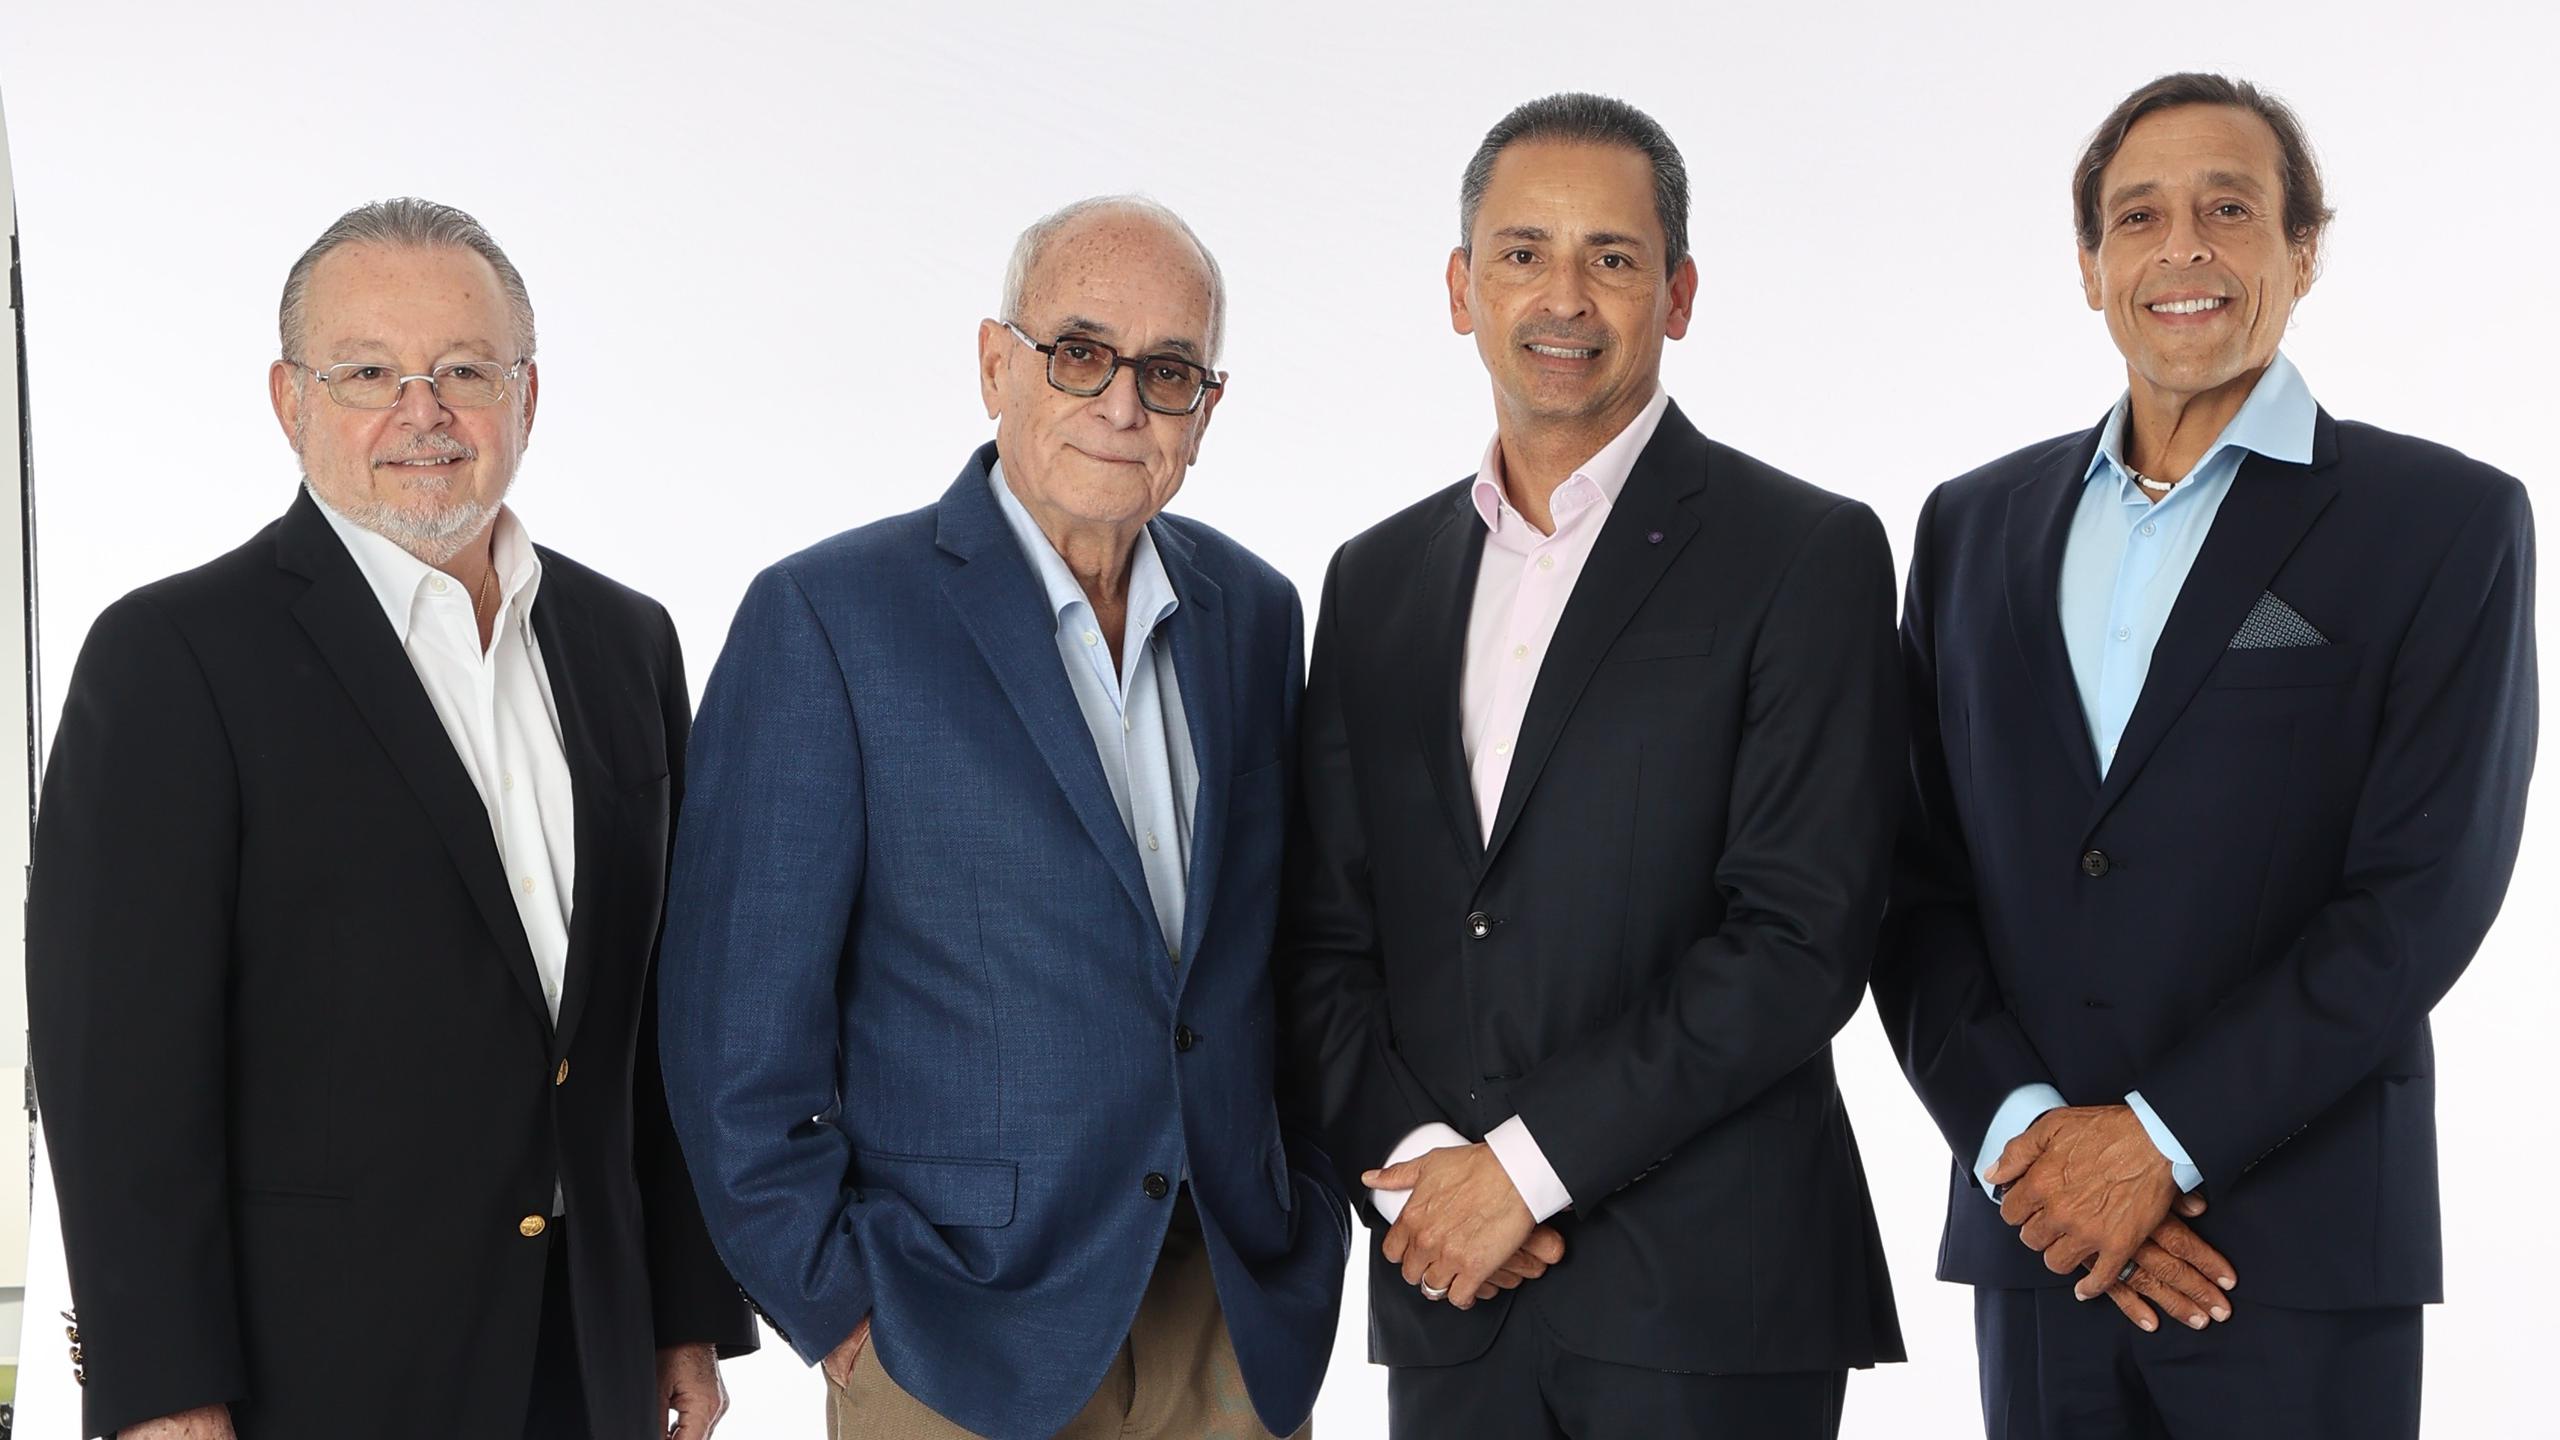 From left to right:  Iván López, chief financial officer (CFO); Jaime Figueroa, chief executive officer (CEO); Dr. Martty Martínez Fraticelli, president and chief pharmacy officer(CPO); Herminio Correa, chief information officer (CIO).